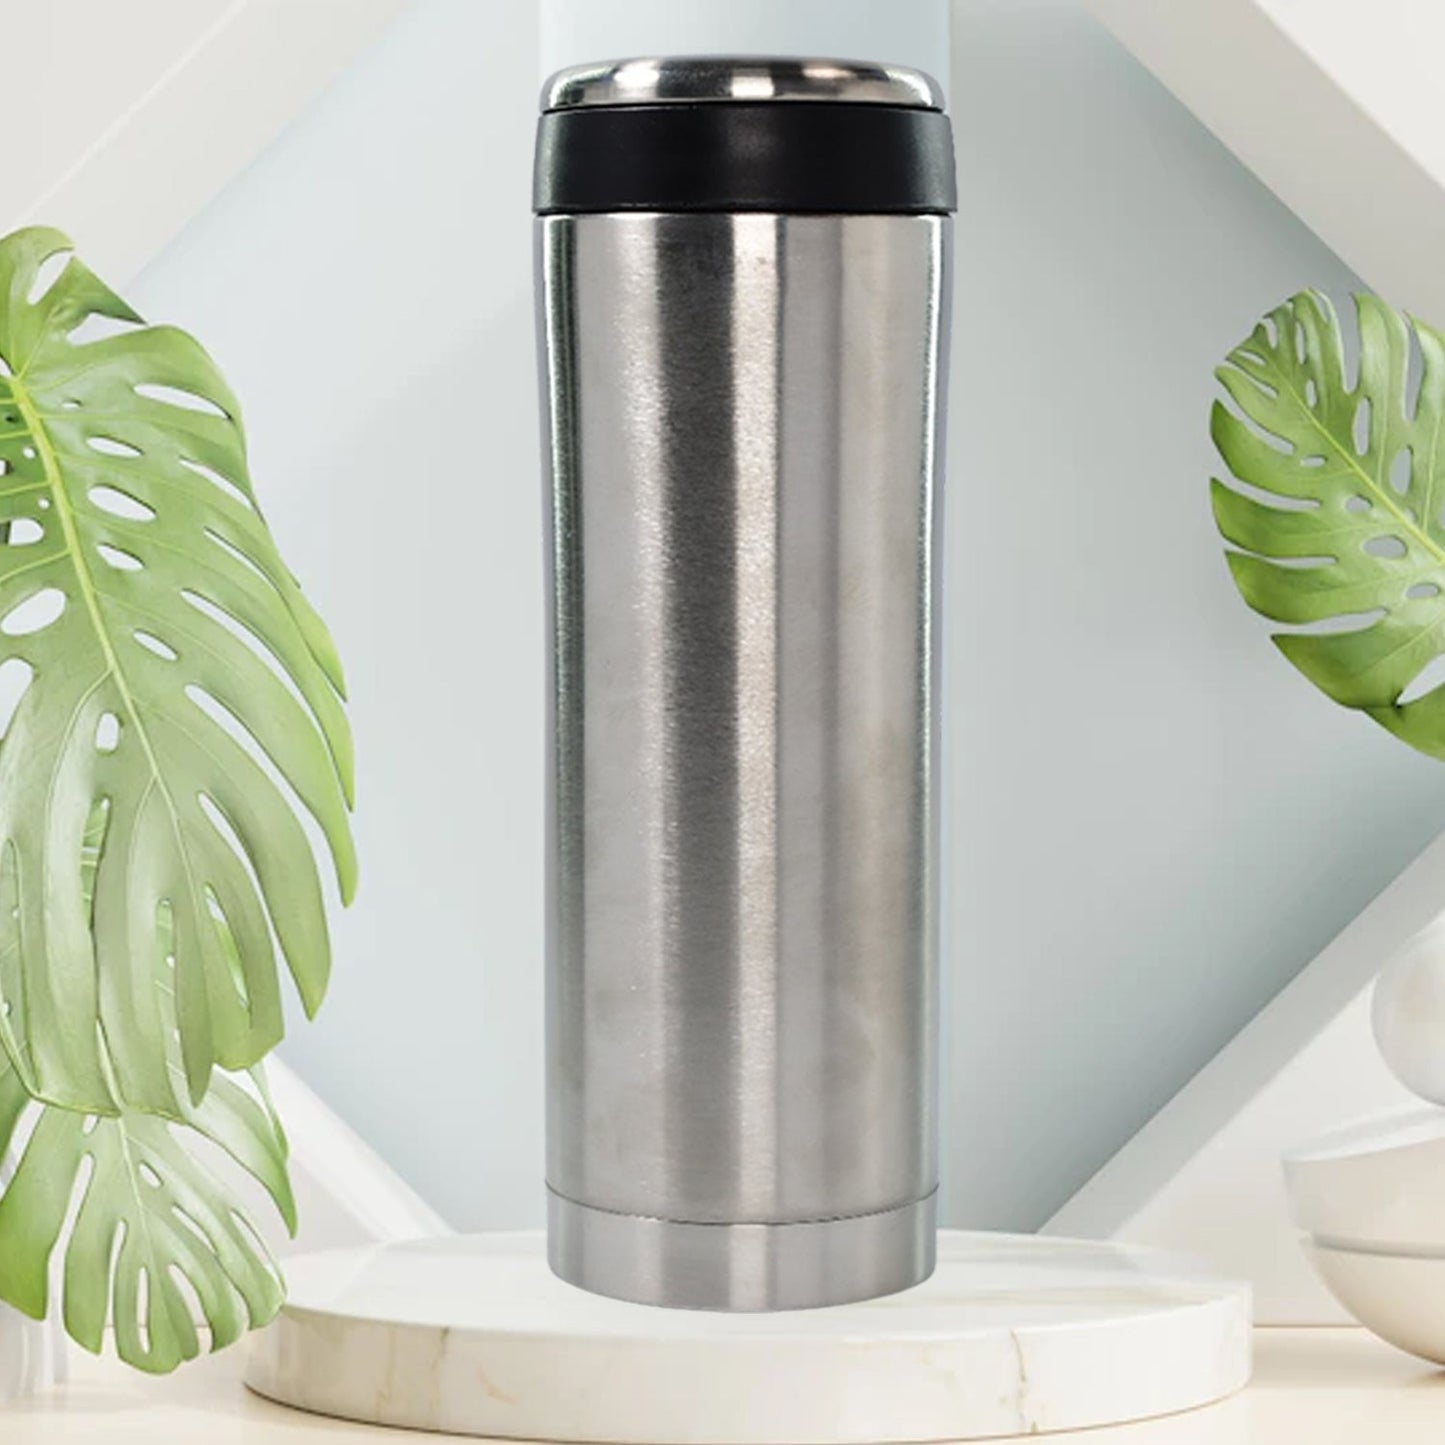 6446 450Ml STAINLESS STEEL WATER BOTTLE FOR MEN WOMEN KIDS | THERMOS FLASK | REUSABLE LEAK-PROOF THERMOS STEEL FOR HOME OFFICE GYM FRIDGE TRAVELLING 